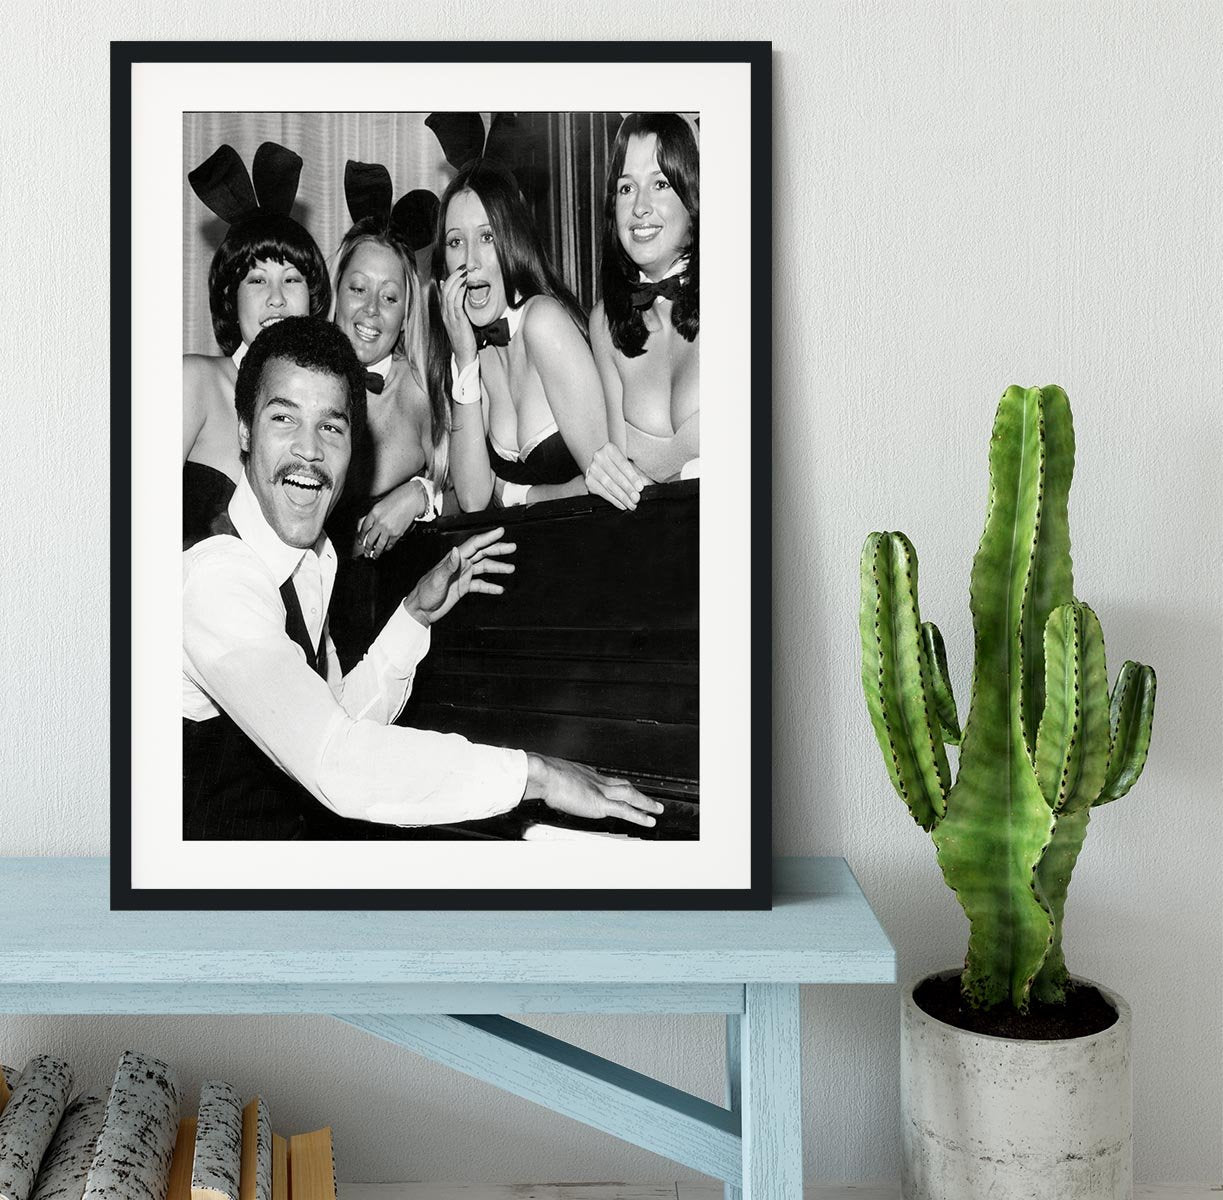 Boxer John Conteh with bunny girls at the playboy club Framed Print - Canvas Art Rocks - 1